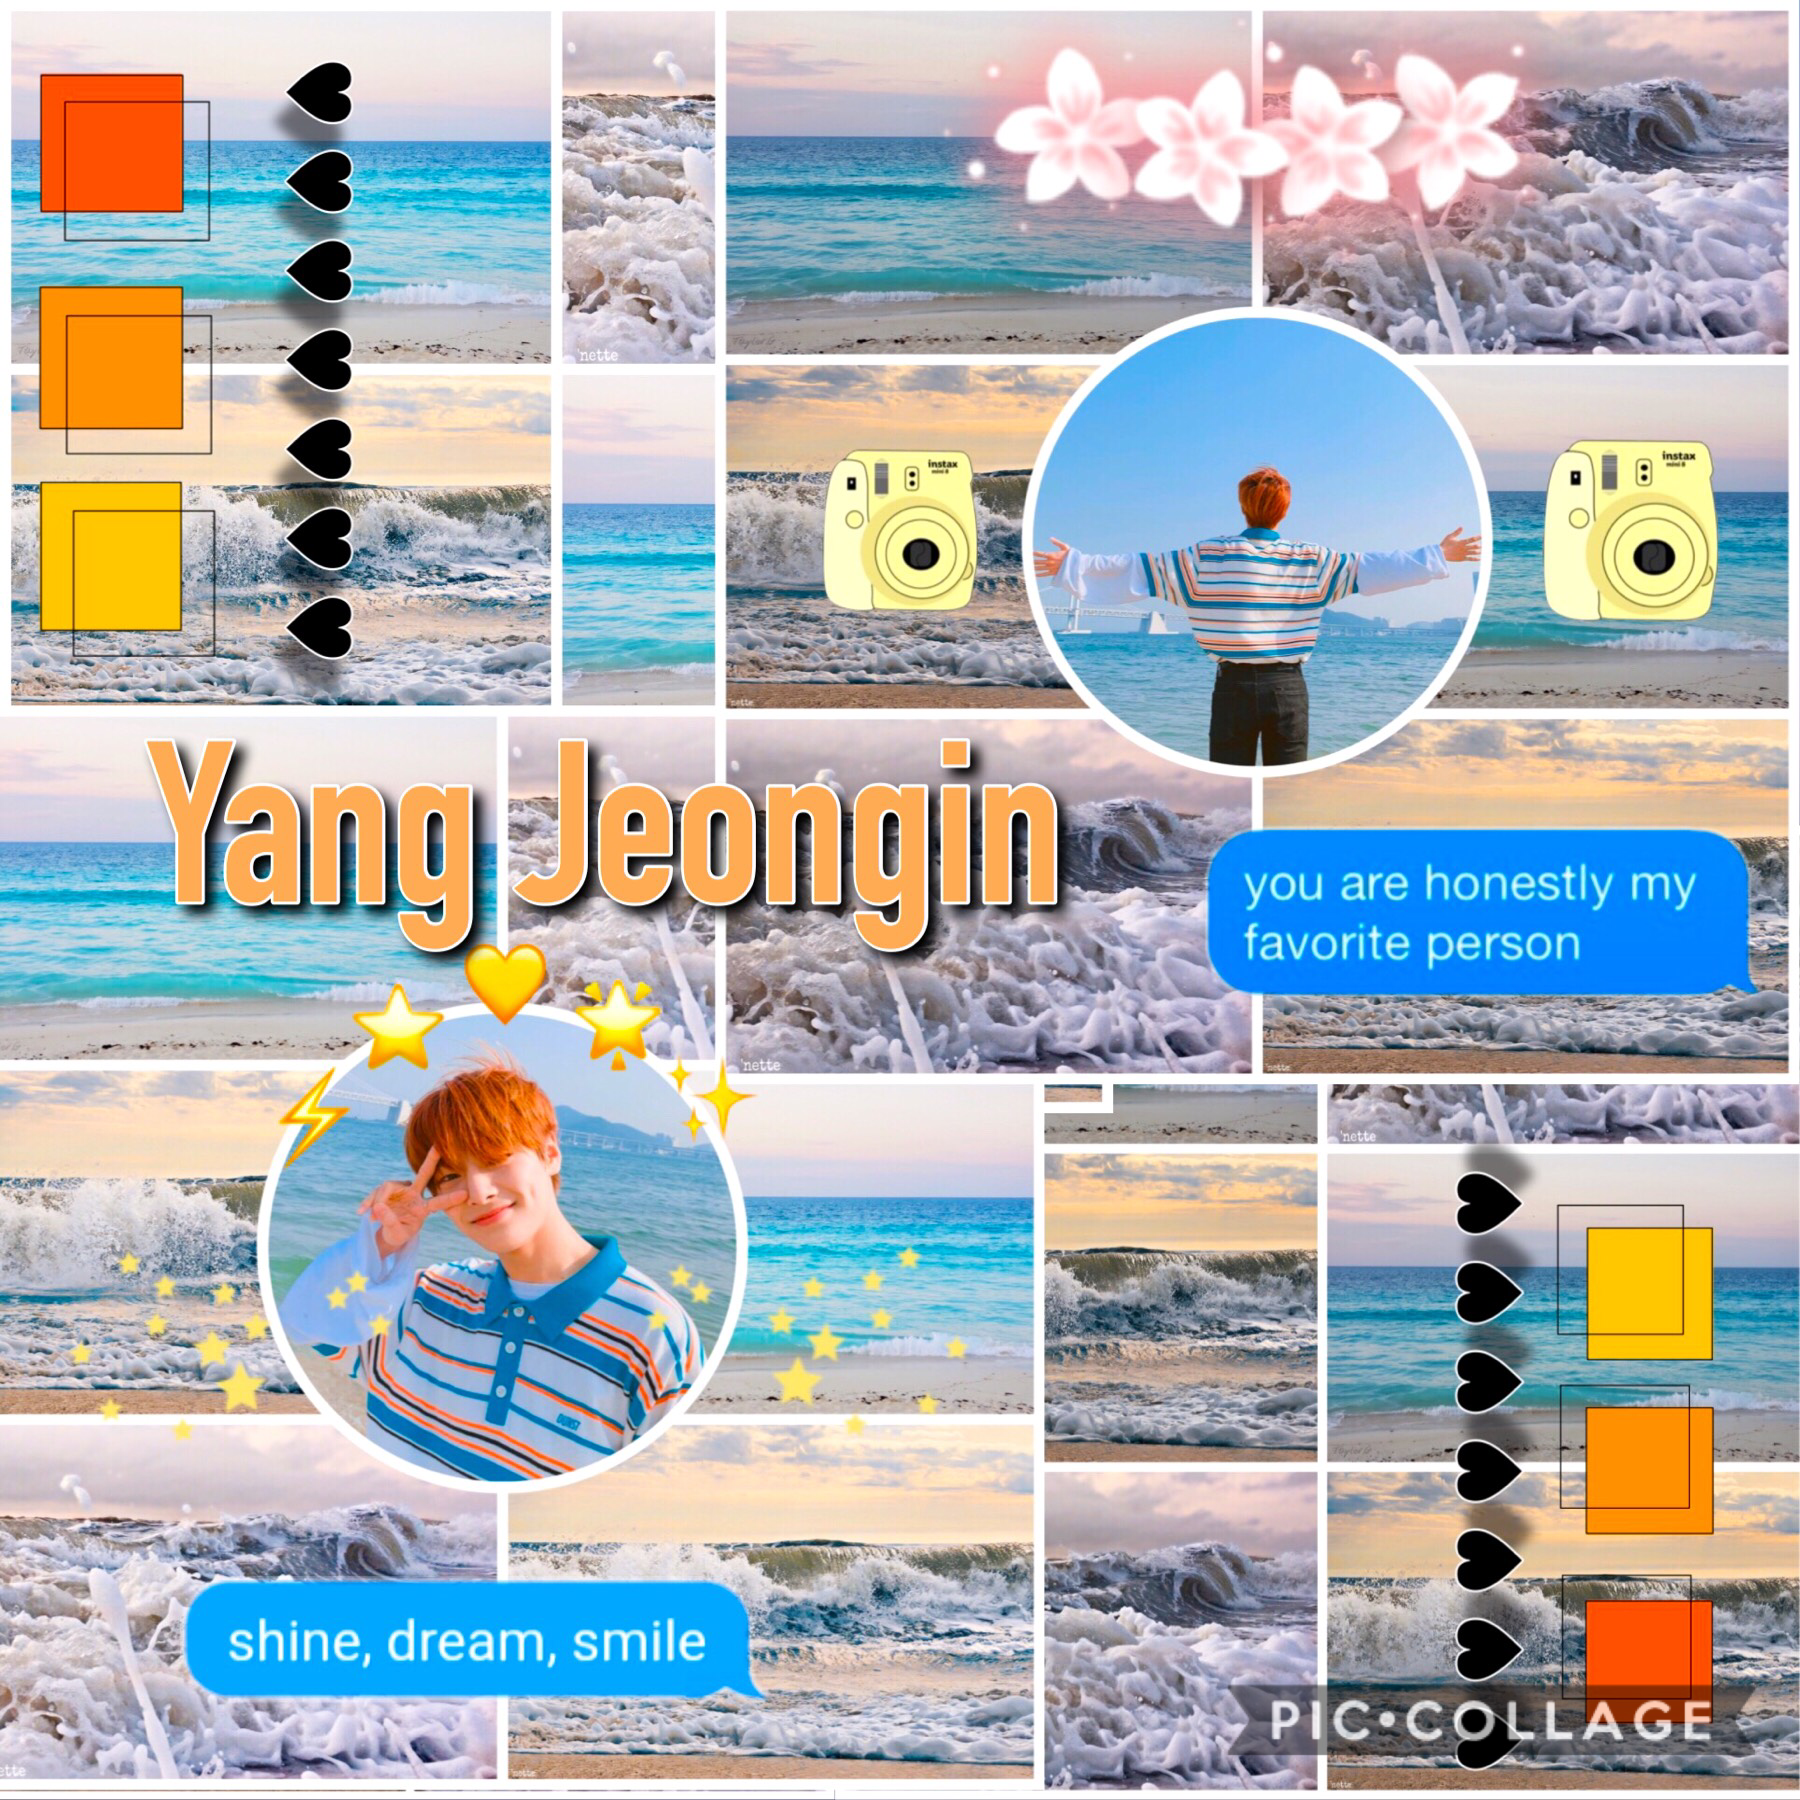 •🚒•
🌸I.N~ Stray Kids🌸
It’s been a while since I’ve done this style! Jeongin is a major uwu and I just had to make a happy and adorable edit with him 😍😊💖